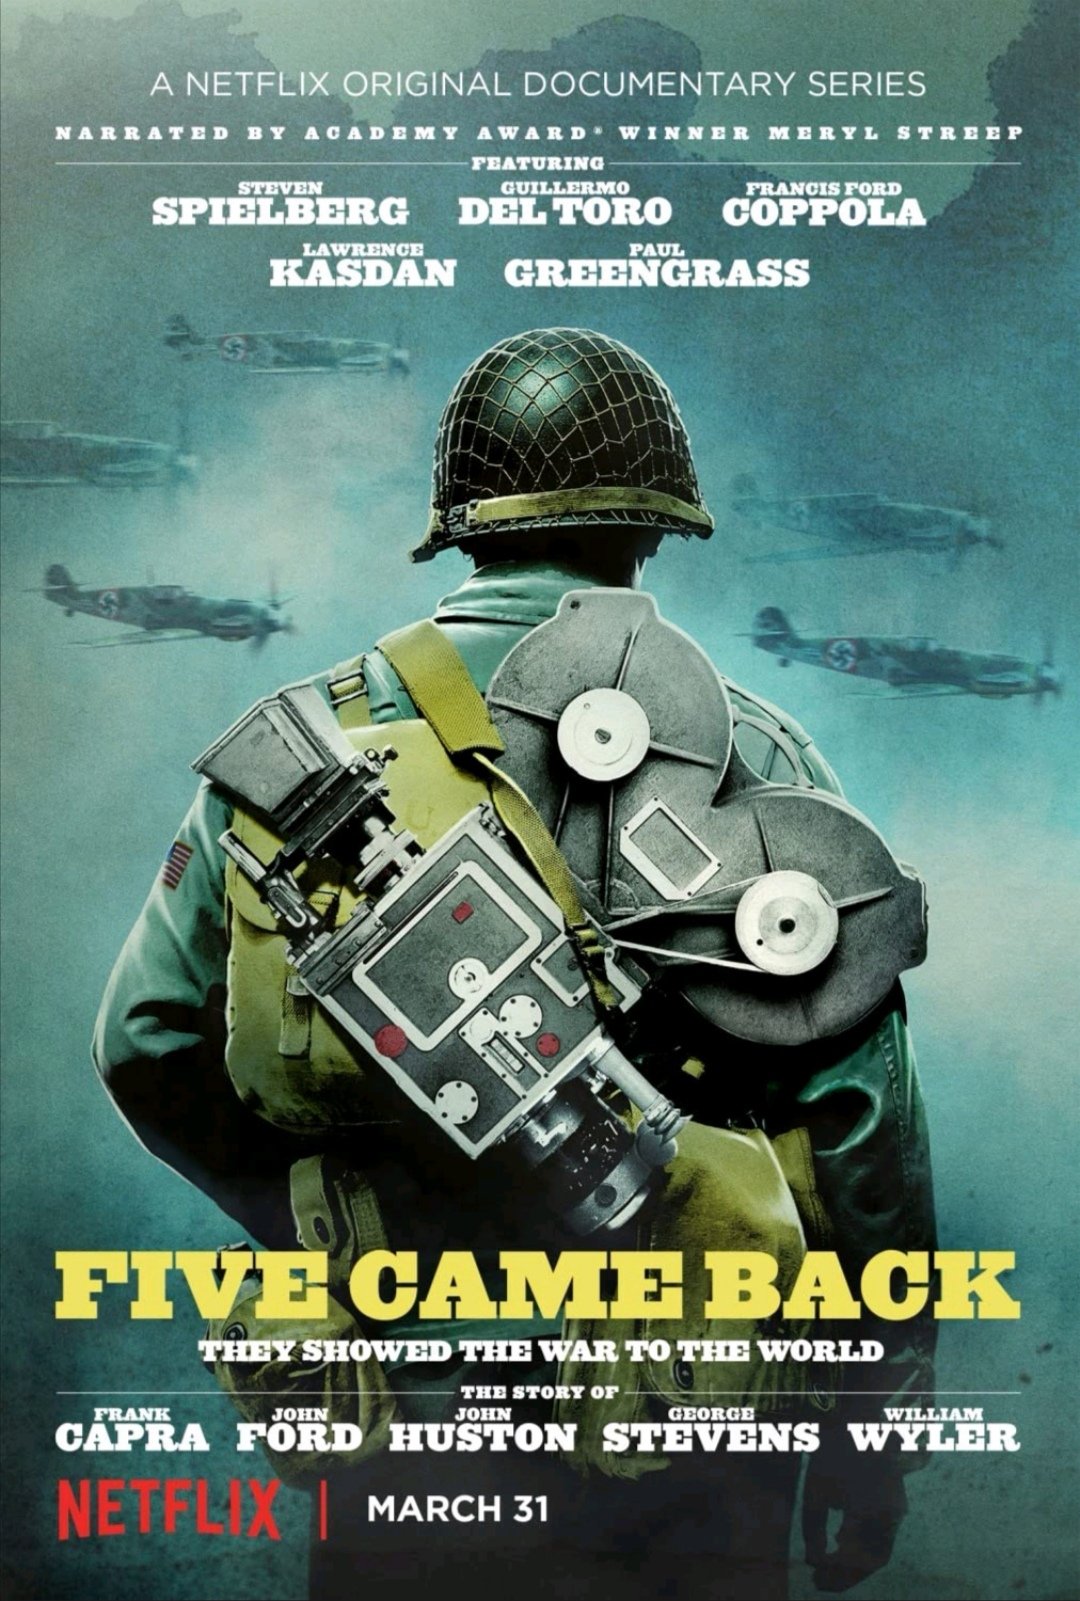 five came back